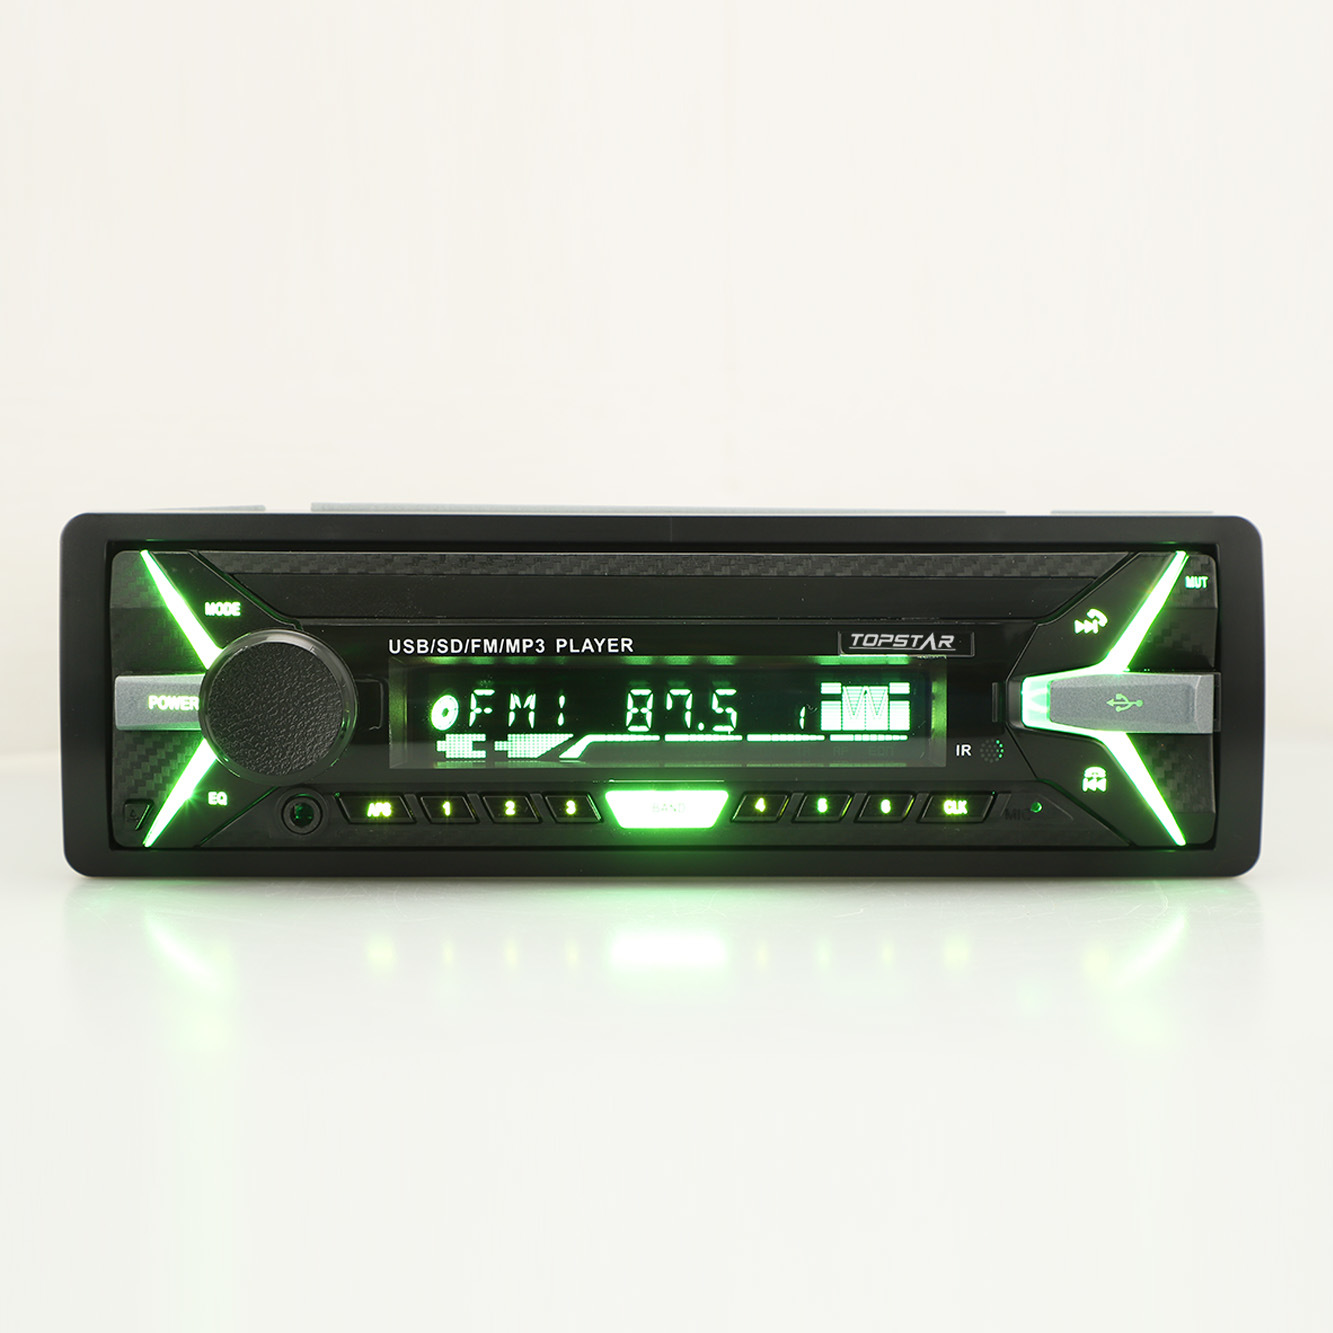 MP3 im Auto, Auto-MP3-Player, LCD-Display, Einzel-DIN-Stereo-Auto-LCD-Player